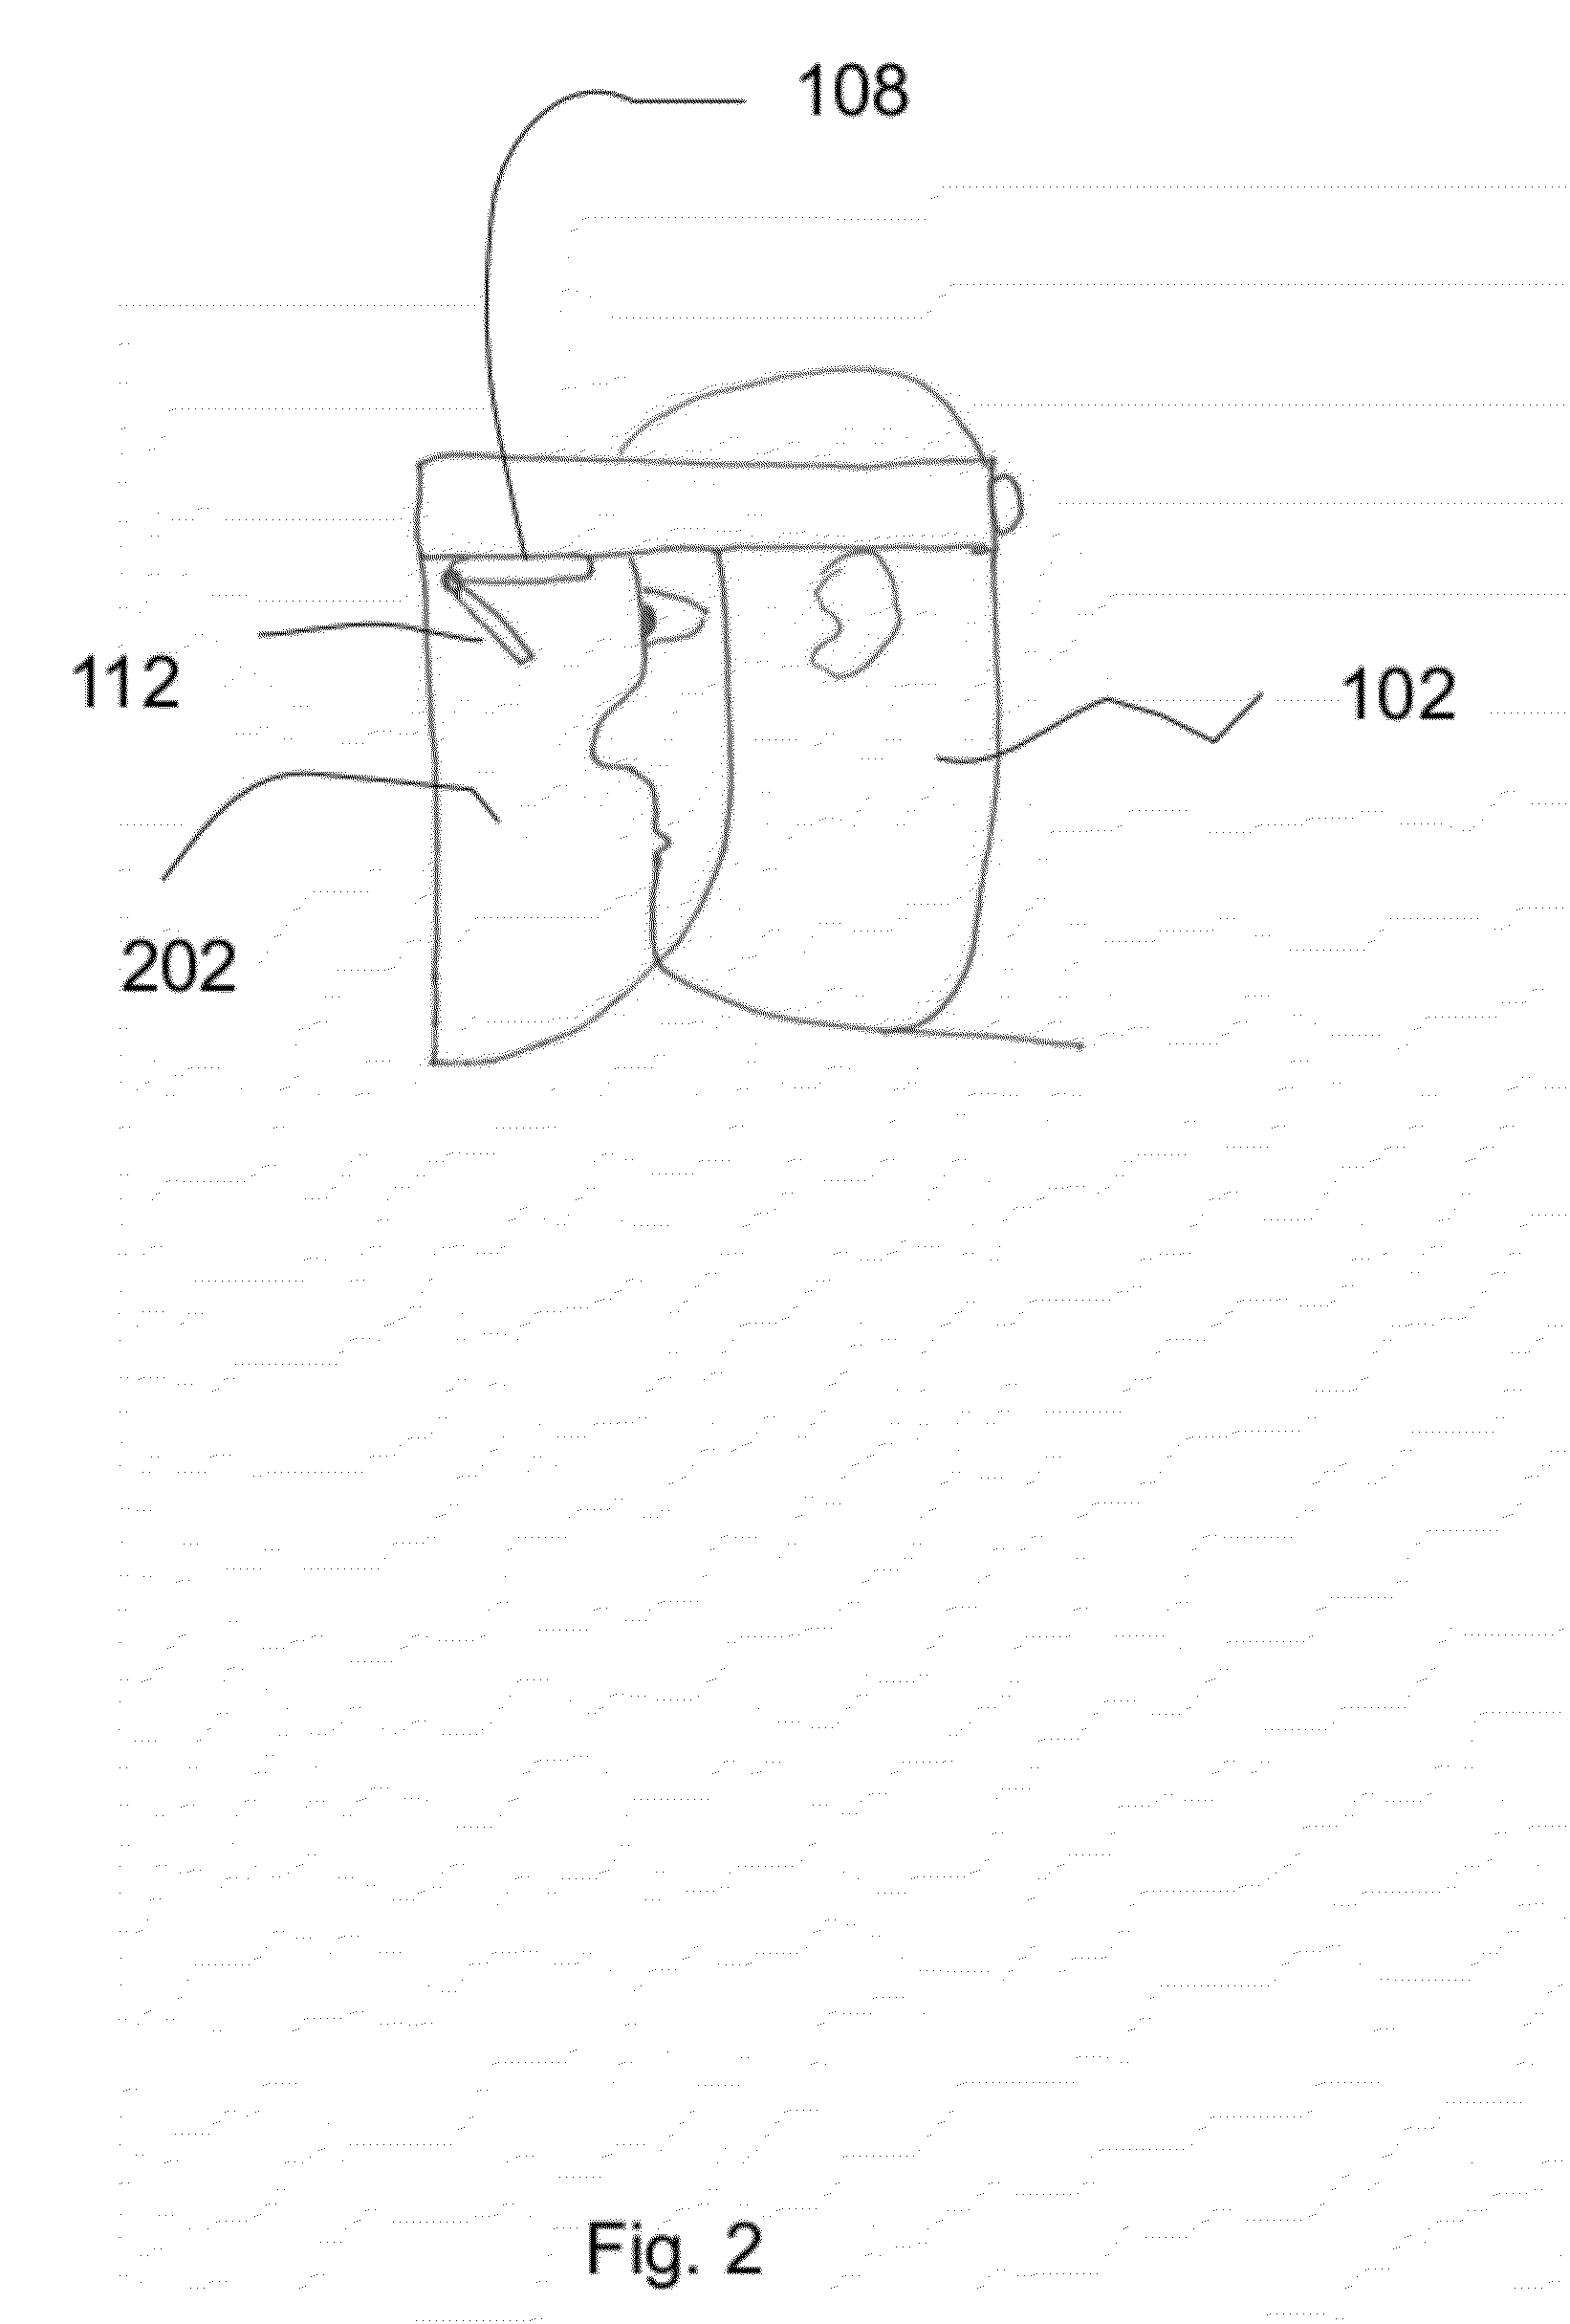 Wearable augmented reality computing apparatus